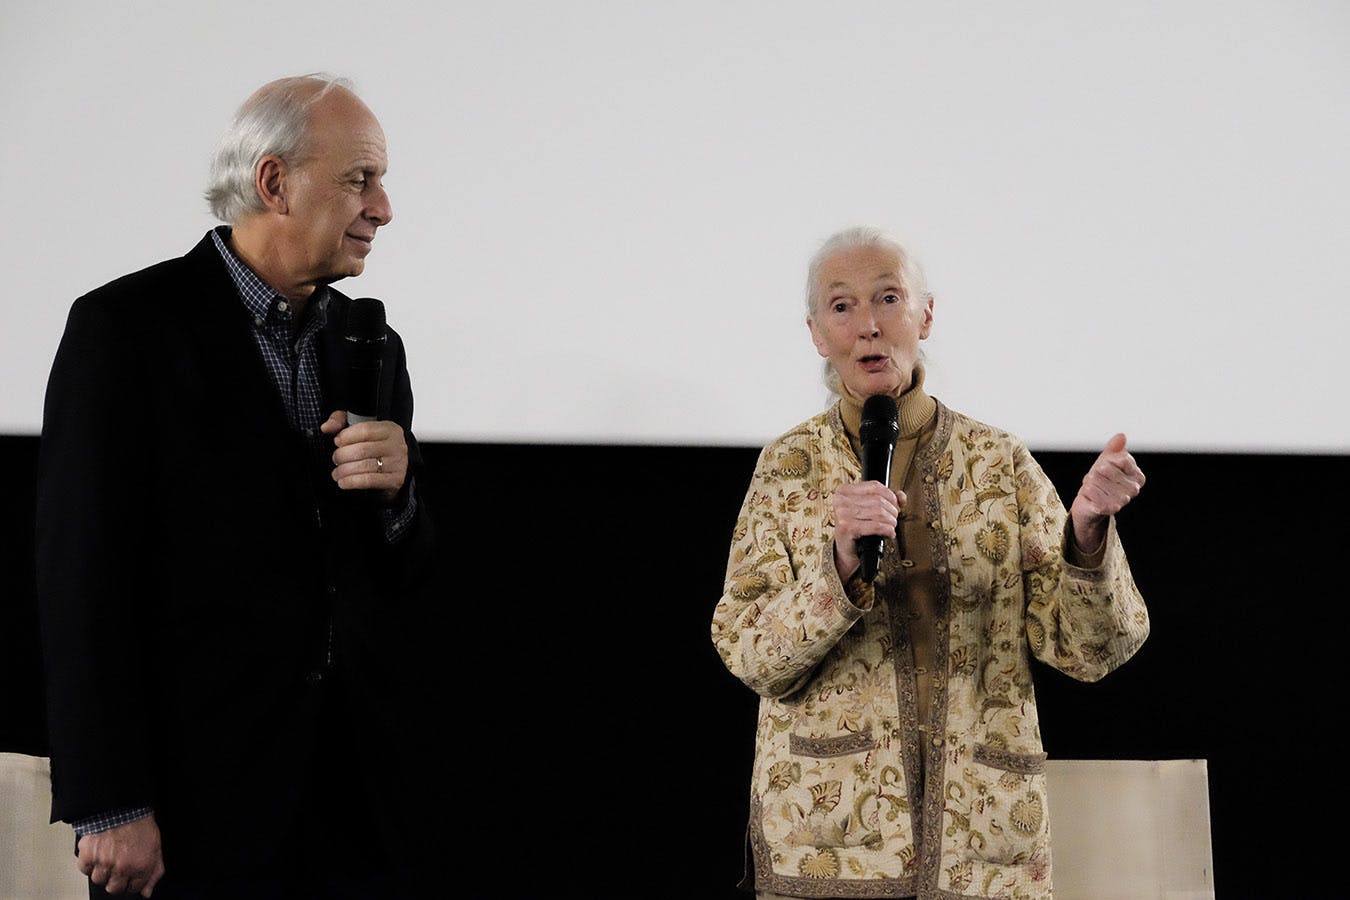 Jane Goodall: We can’t go back to business as usual